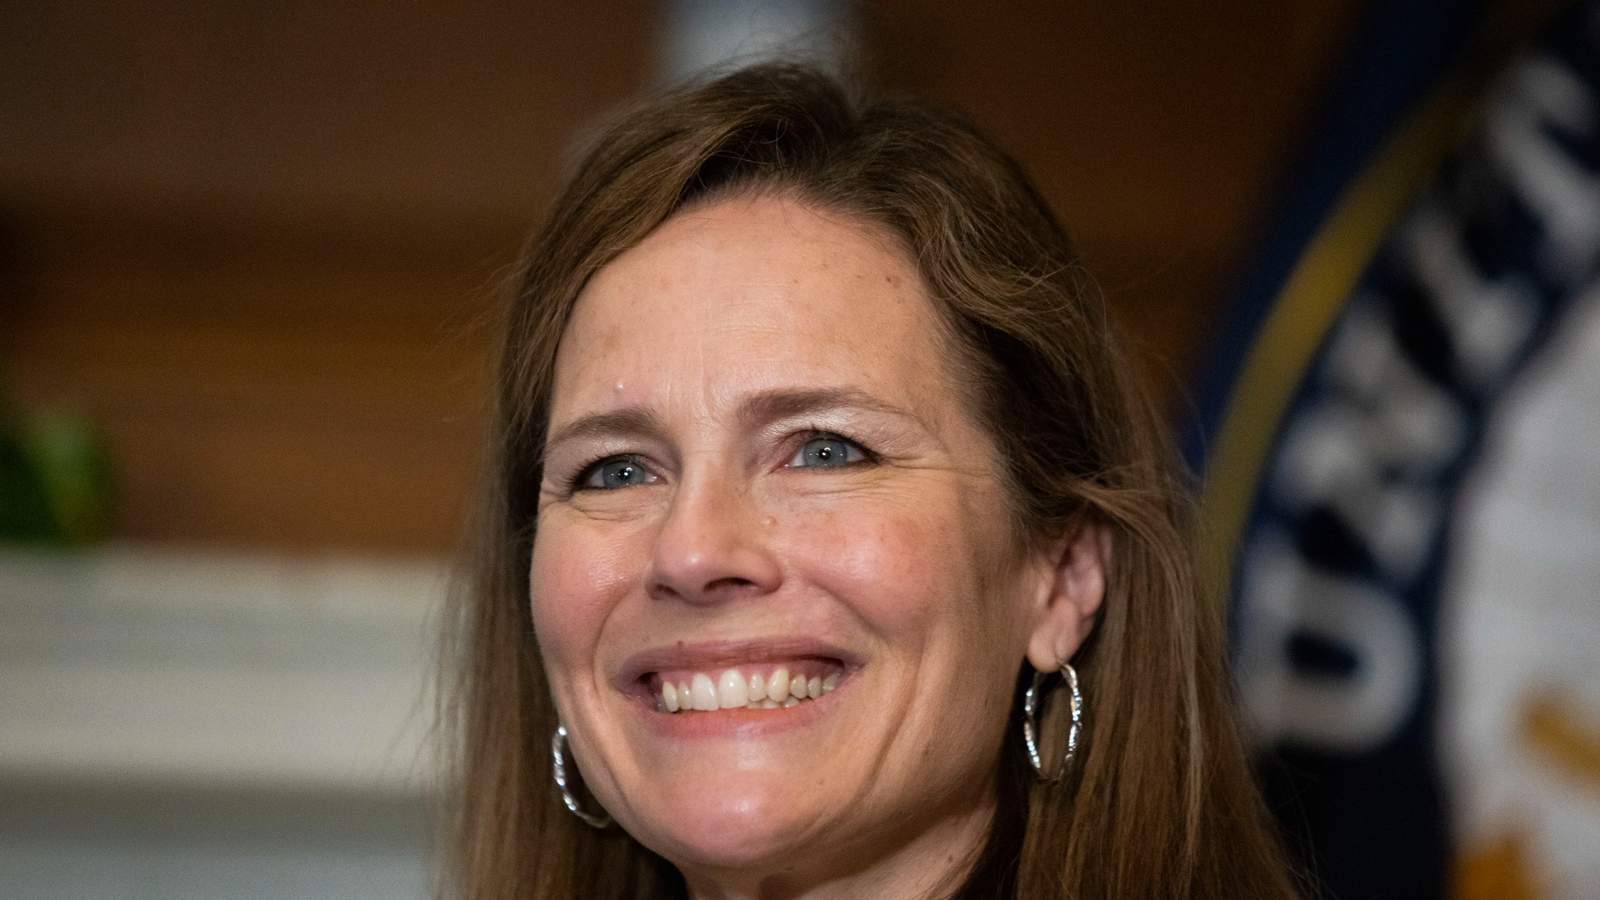 LIVE: Confirmation hearing of Supreme Court nominee Amy Coney Barrett